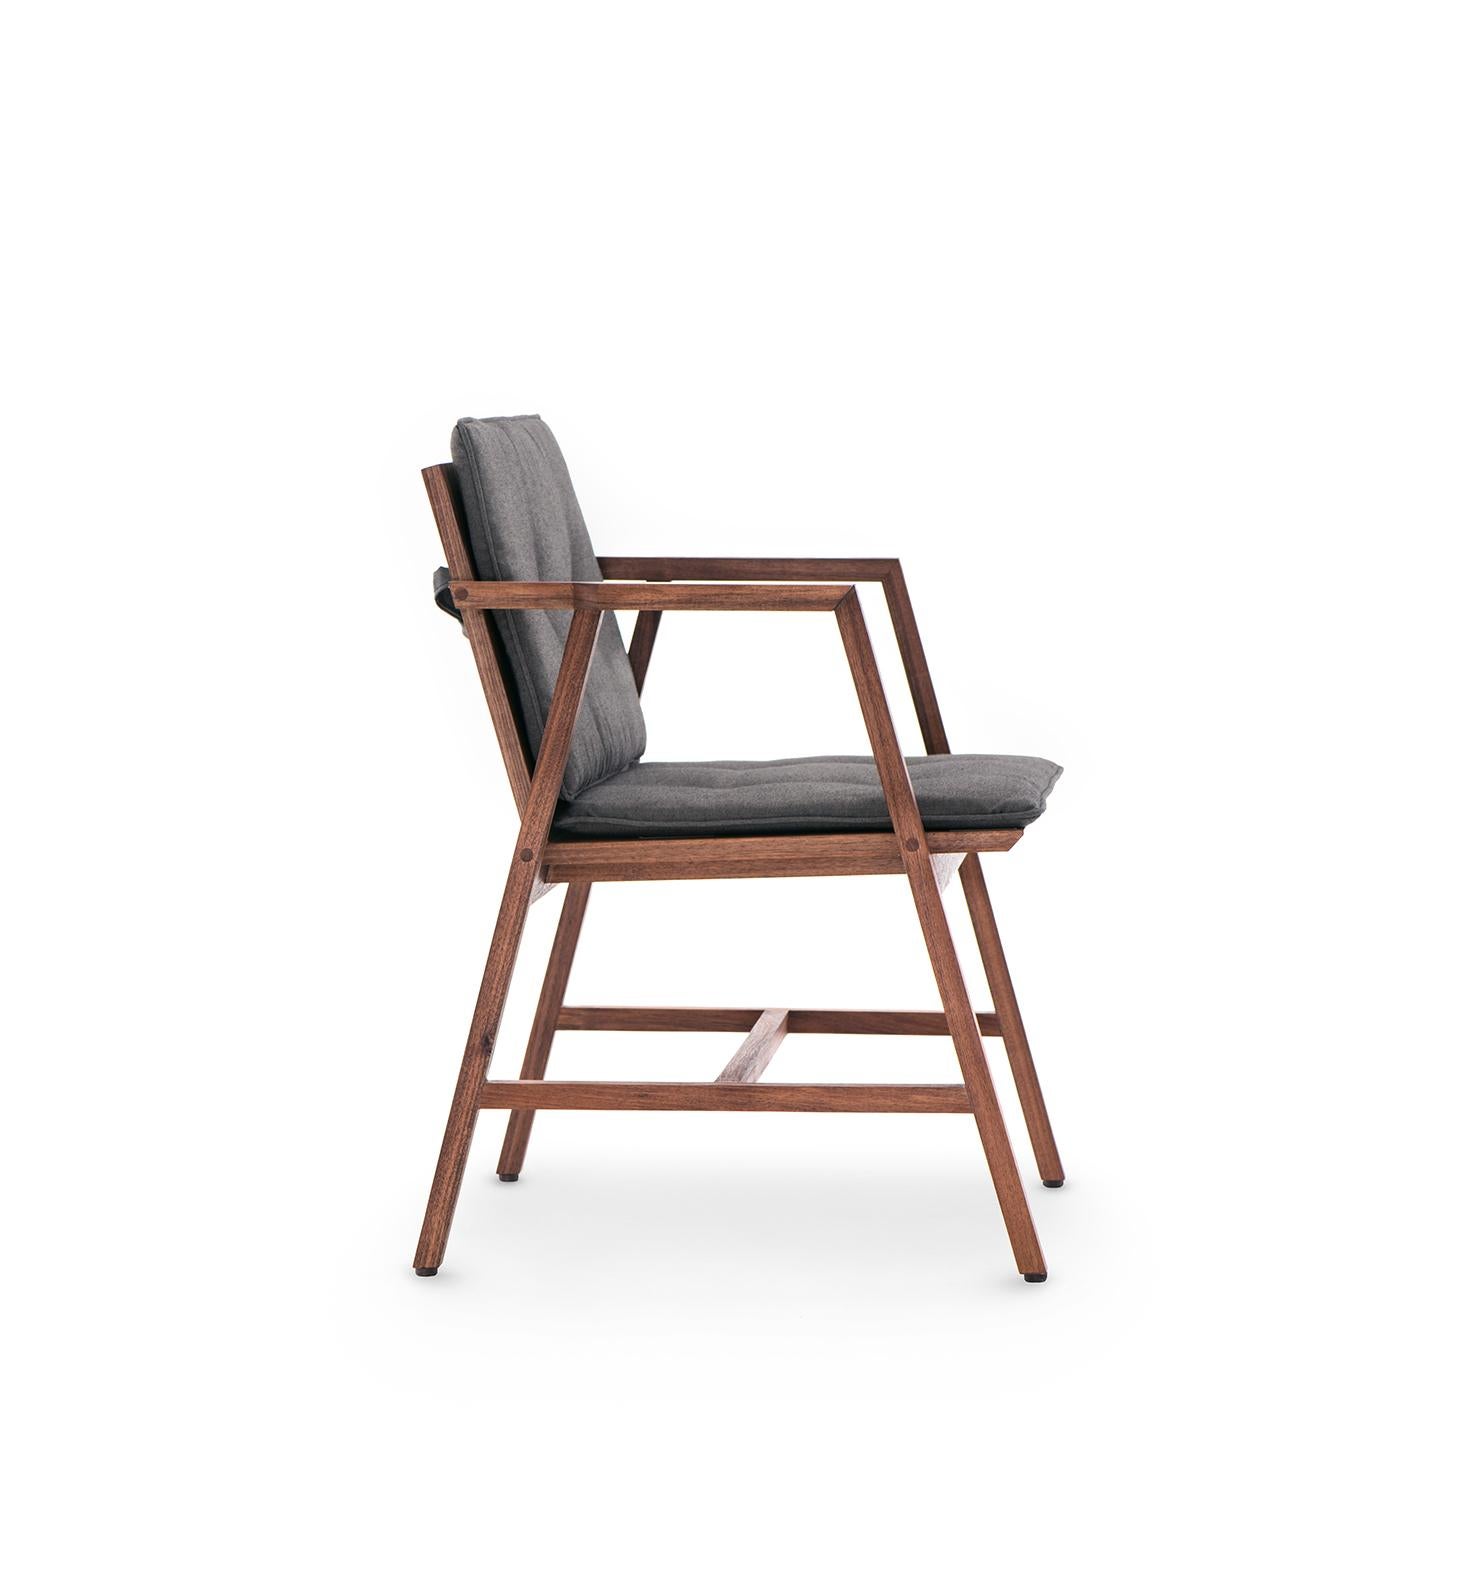 Introducing the Dining Dedo Chair, a Mexican Contemporary Dining Chair designed by Emiliano Molina for CUCHARA. This dining chair encapsulates elegance, solidity, and complete utility. It is the result of an extensive exploration of ergonomics,